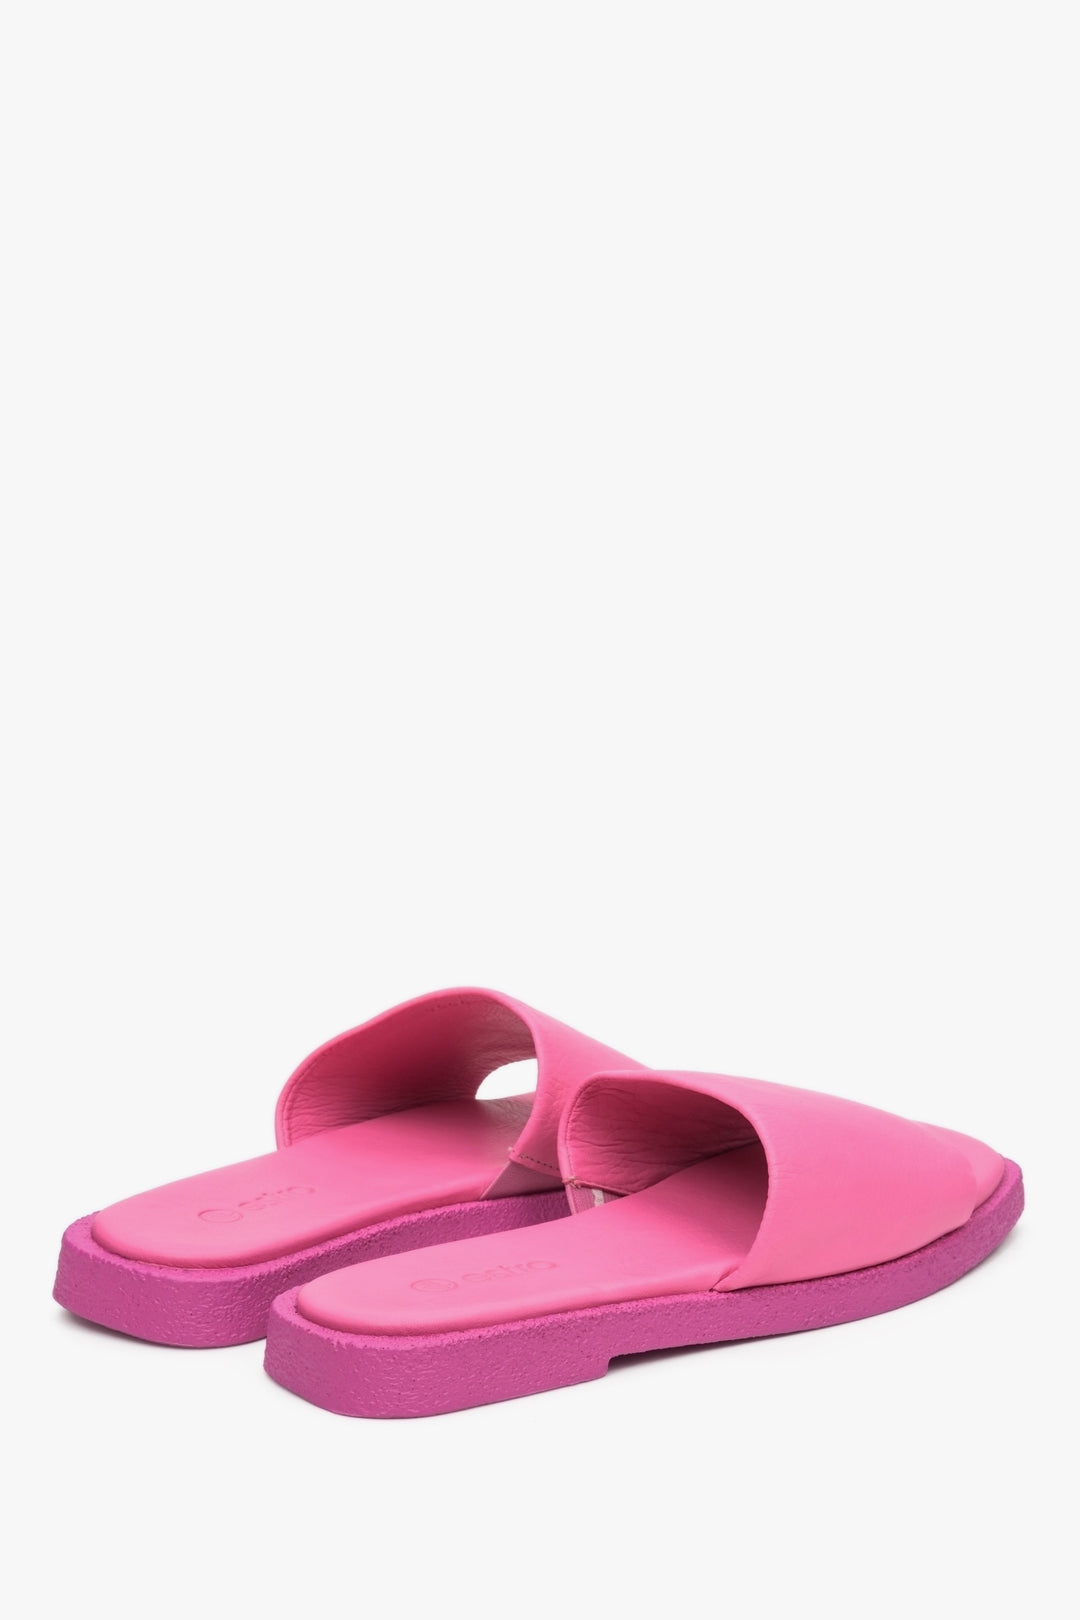 Women's pink Estro flat slides made of natural leather.